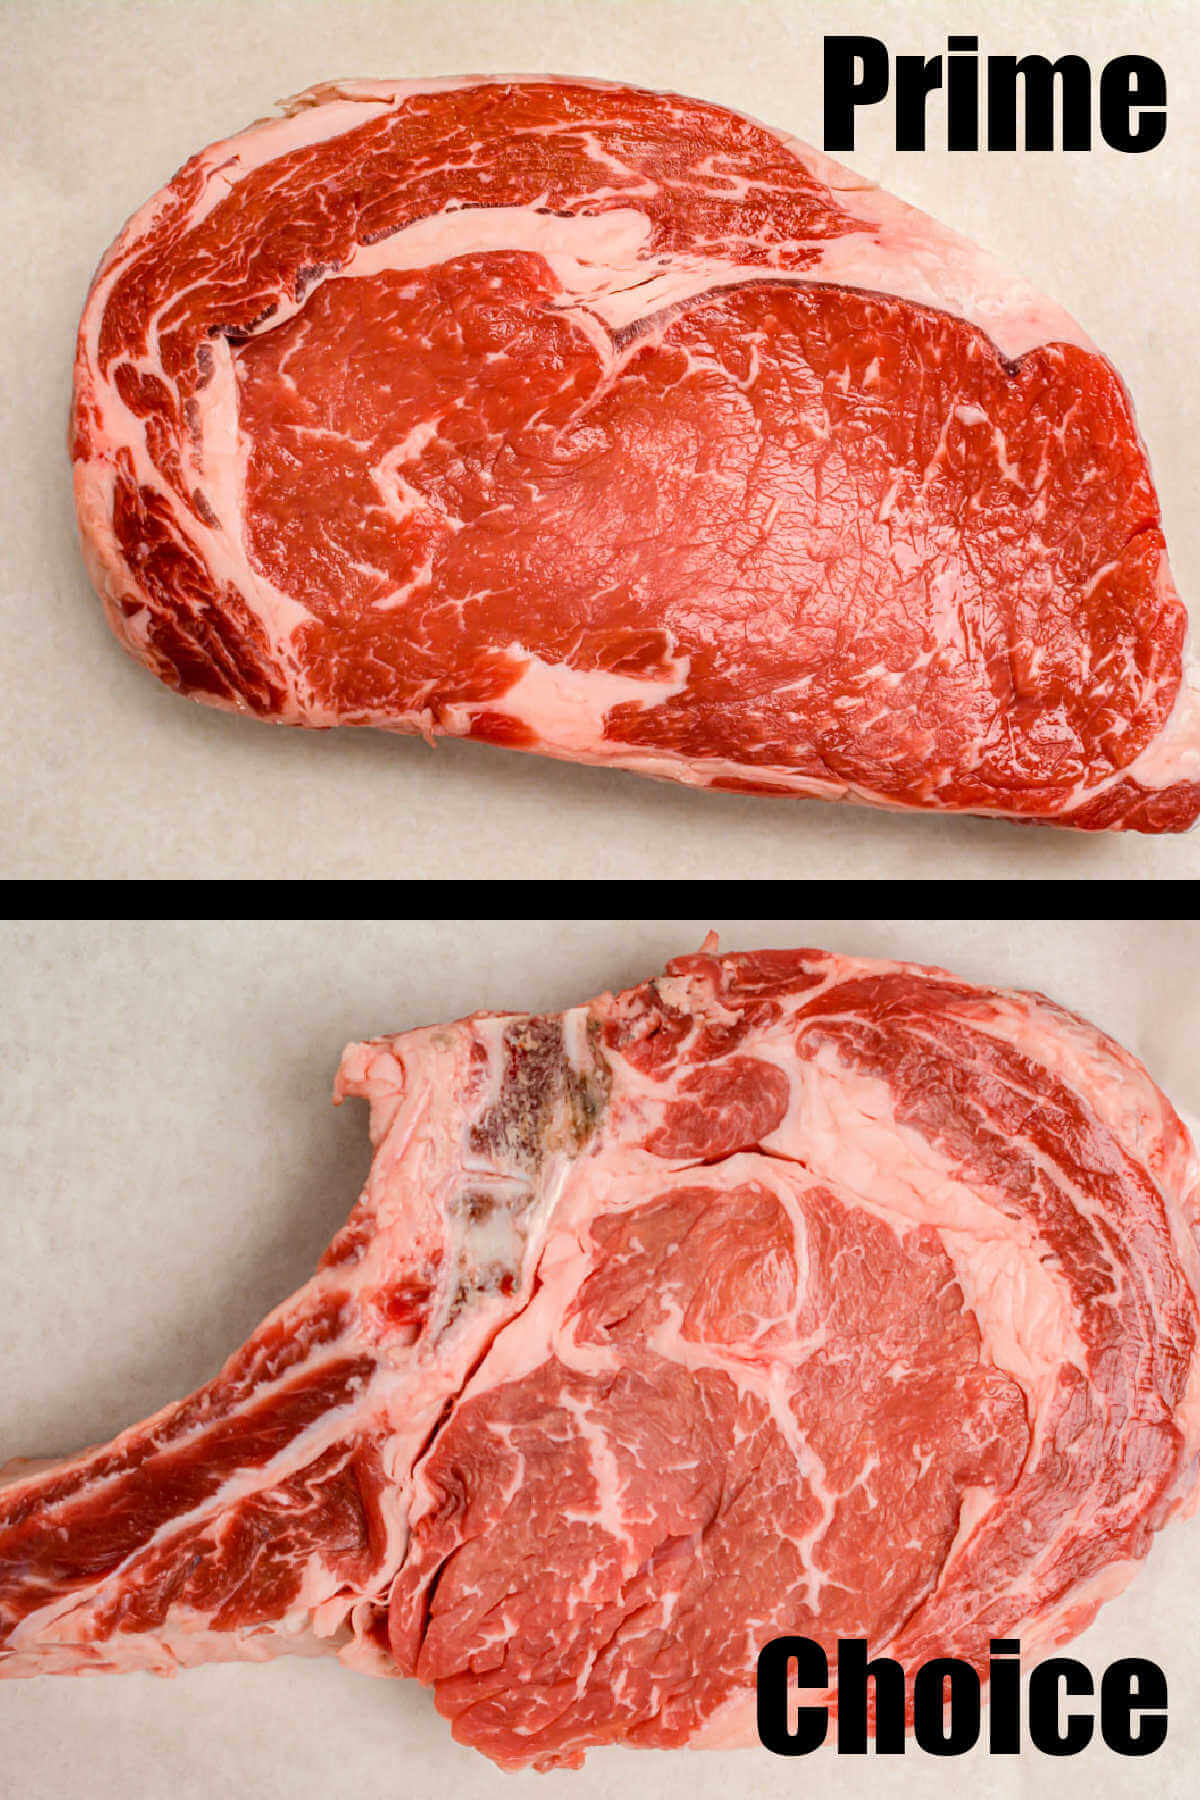 photo of a Delmonico steak with a prime grading and a choice ribeye.